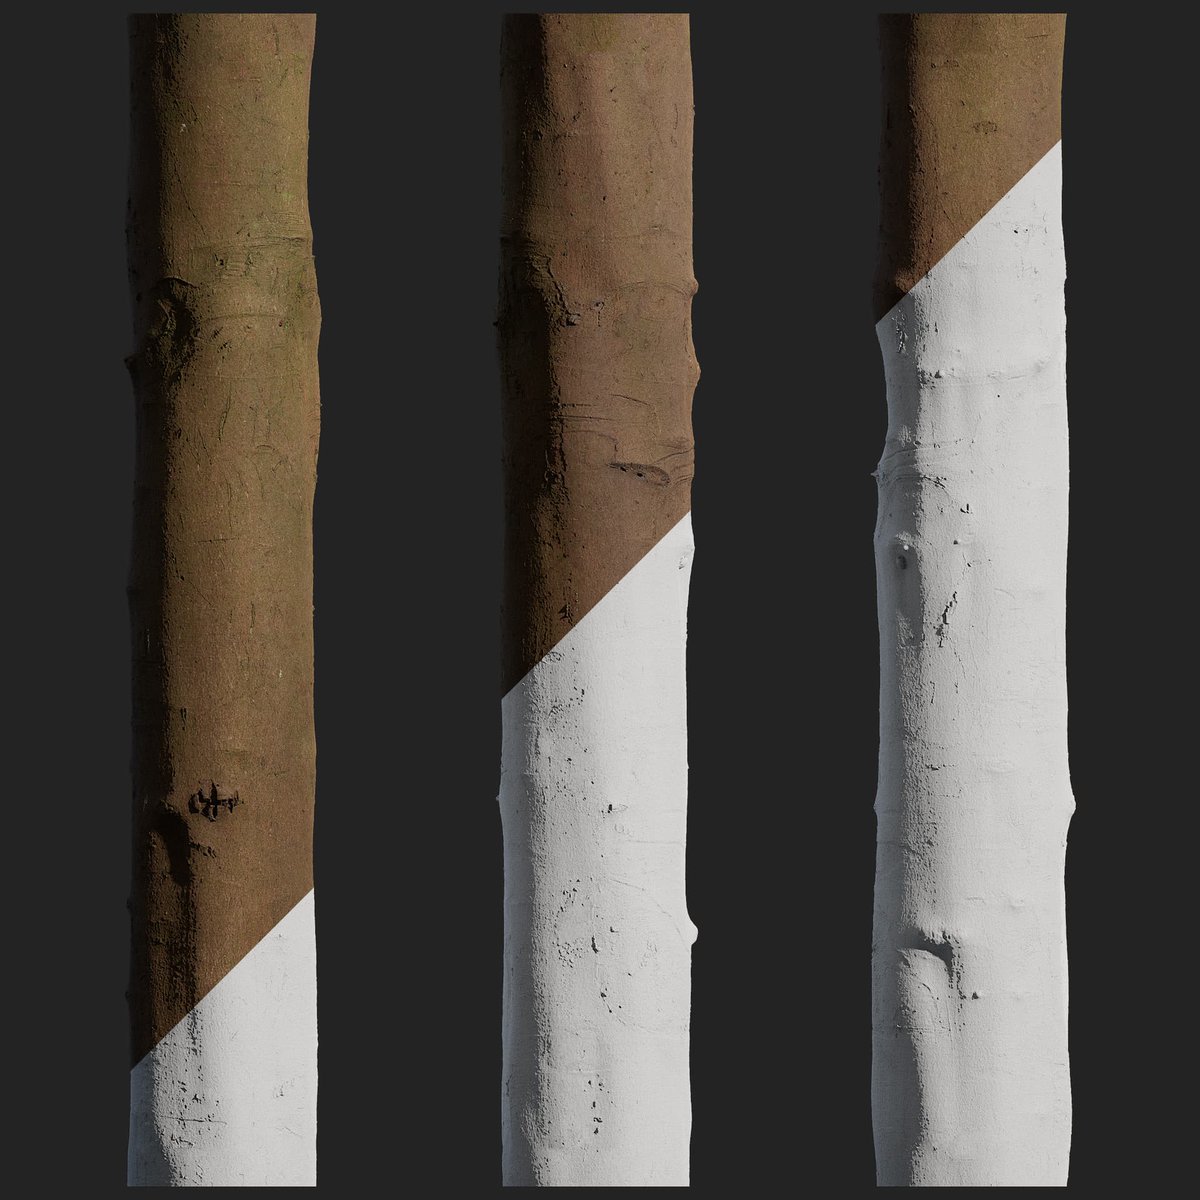 Tree bark material using photogrammetry workflow by @pbrpxcom Created using #RealityCapture Learn more at forums.unrealengine.com/t/free-bark-ma… #realitycapture #photogrammetry #3dscanning capturingreality.com